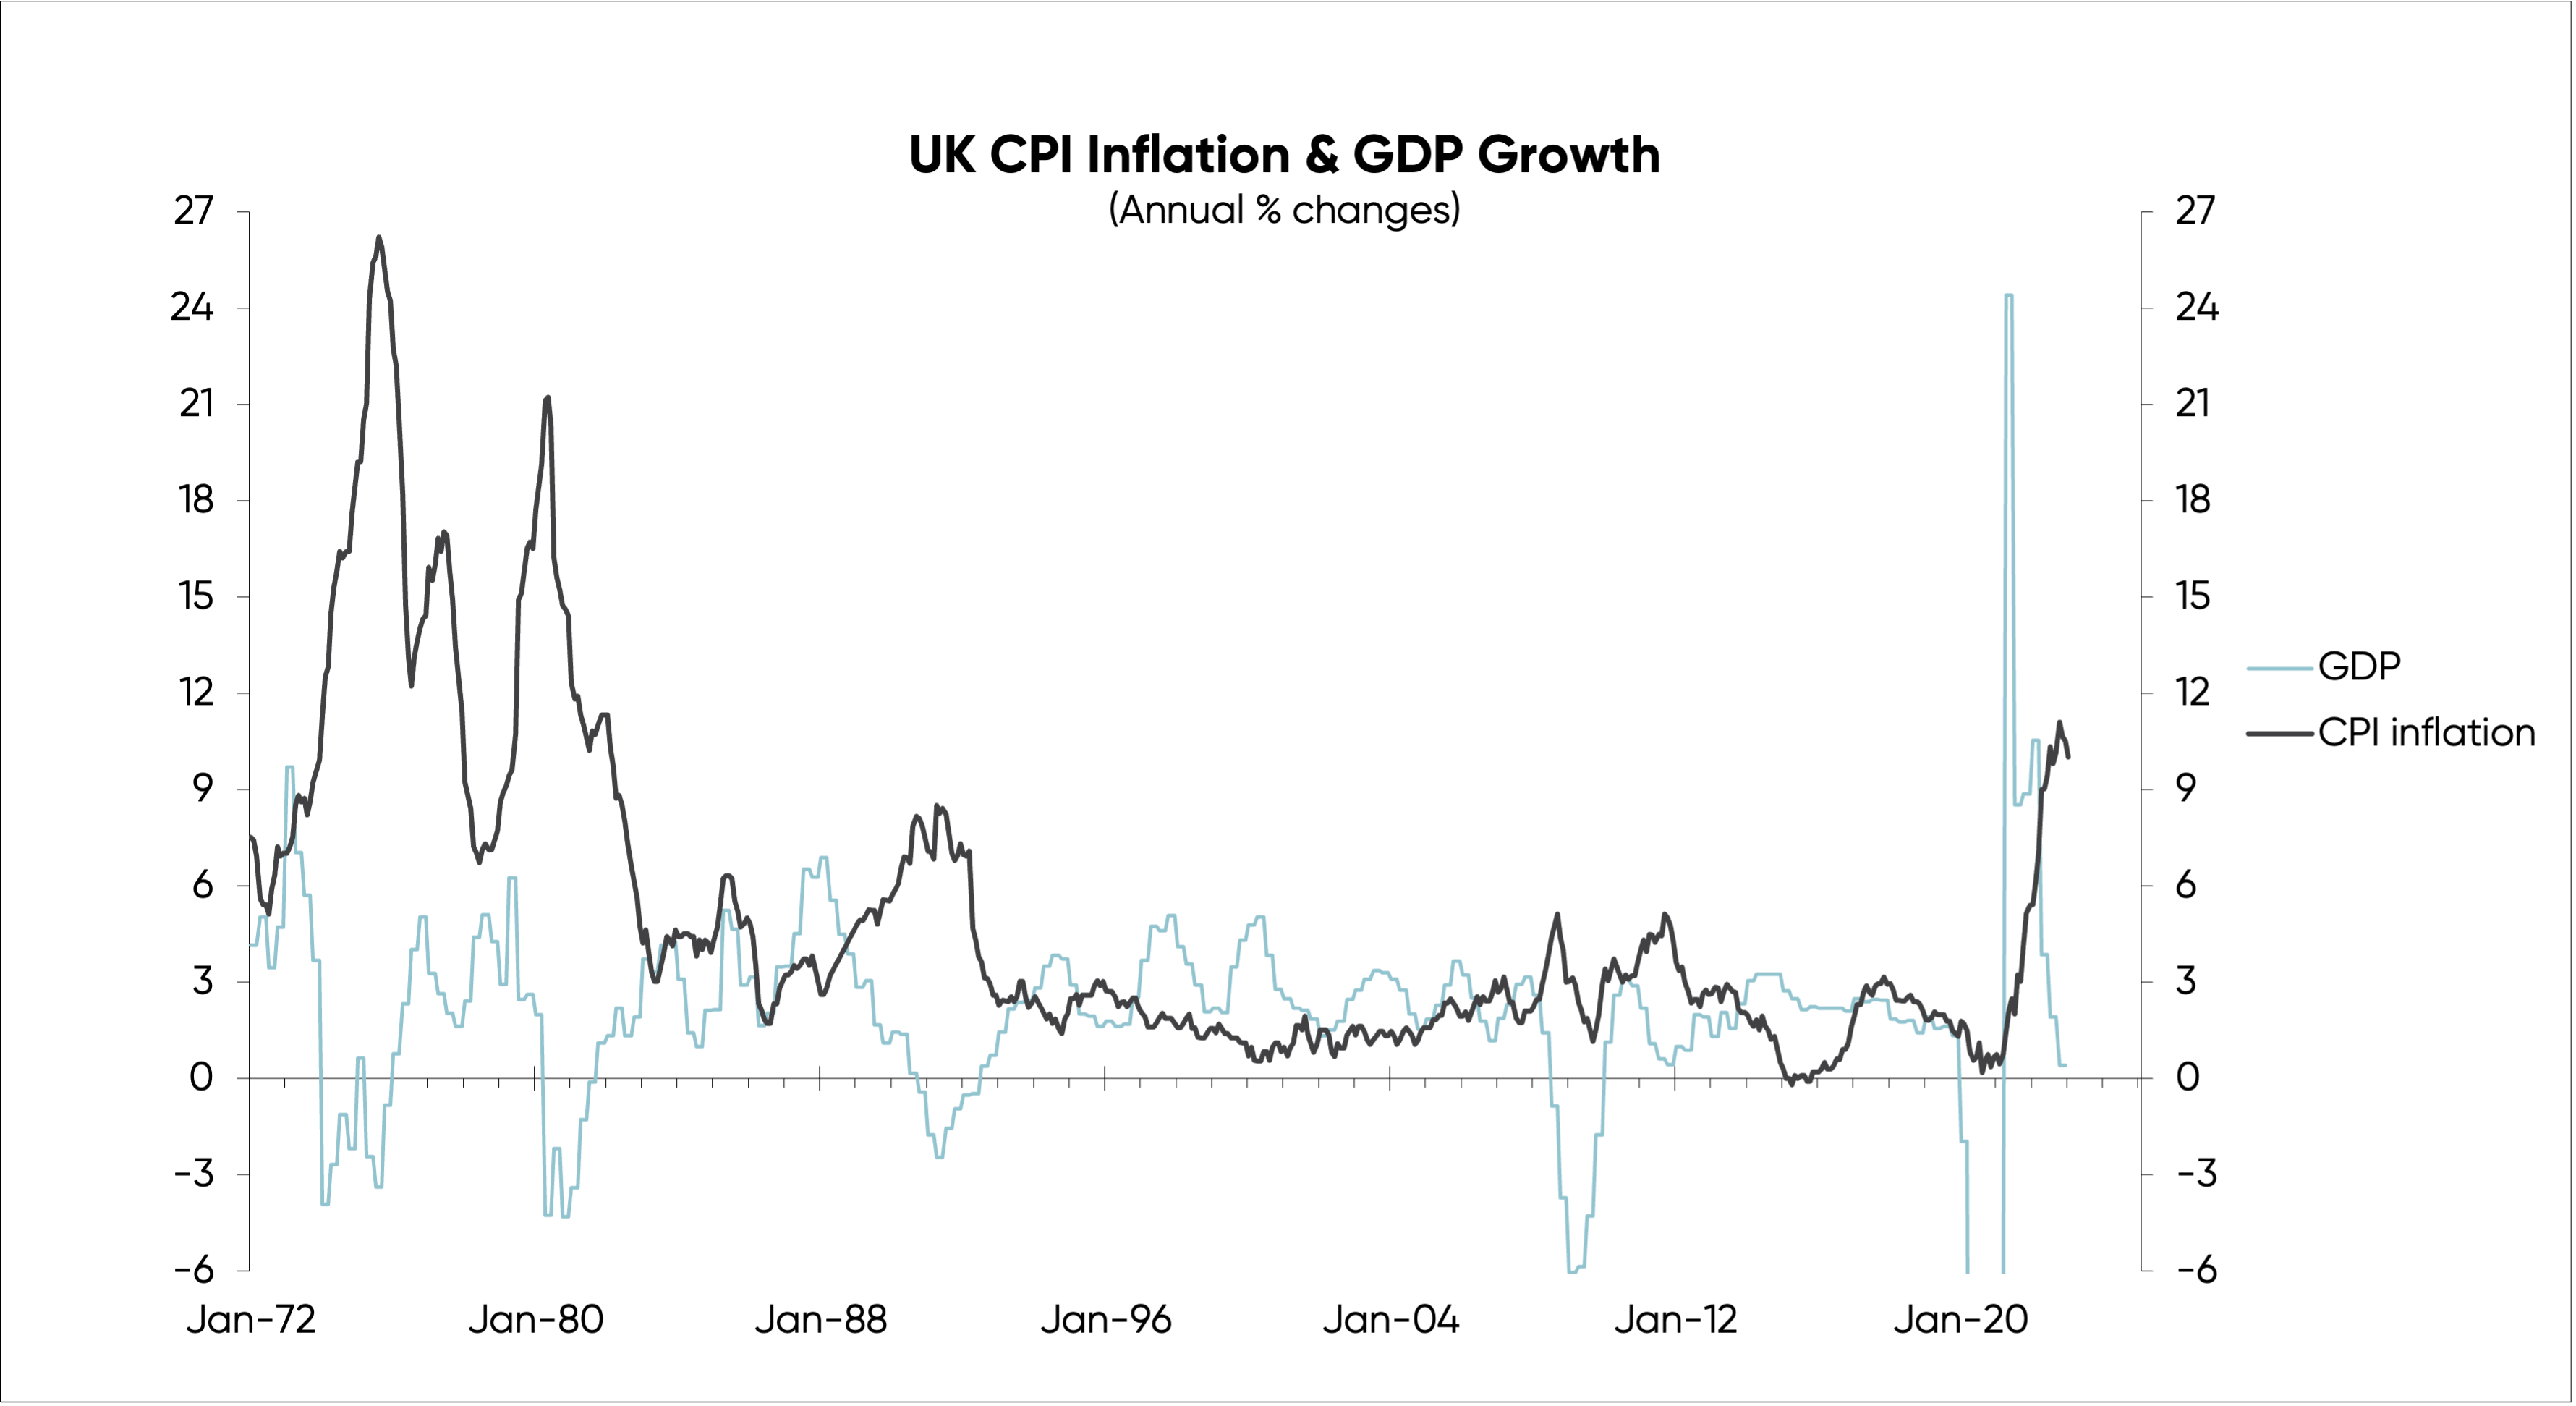 Graph tracking percentage shift in UK GDP against percentage shift in CPI inflation since early 1970s